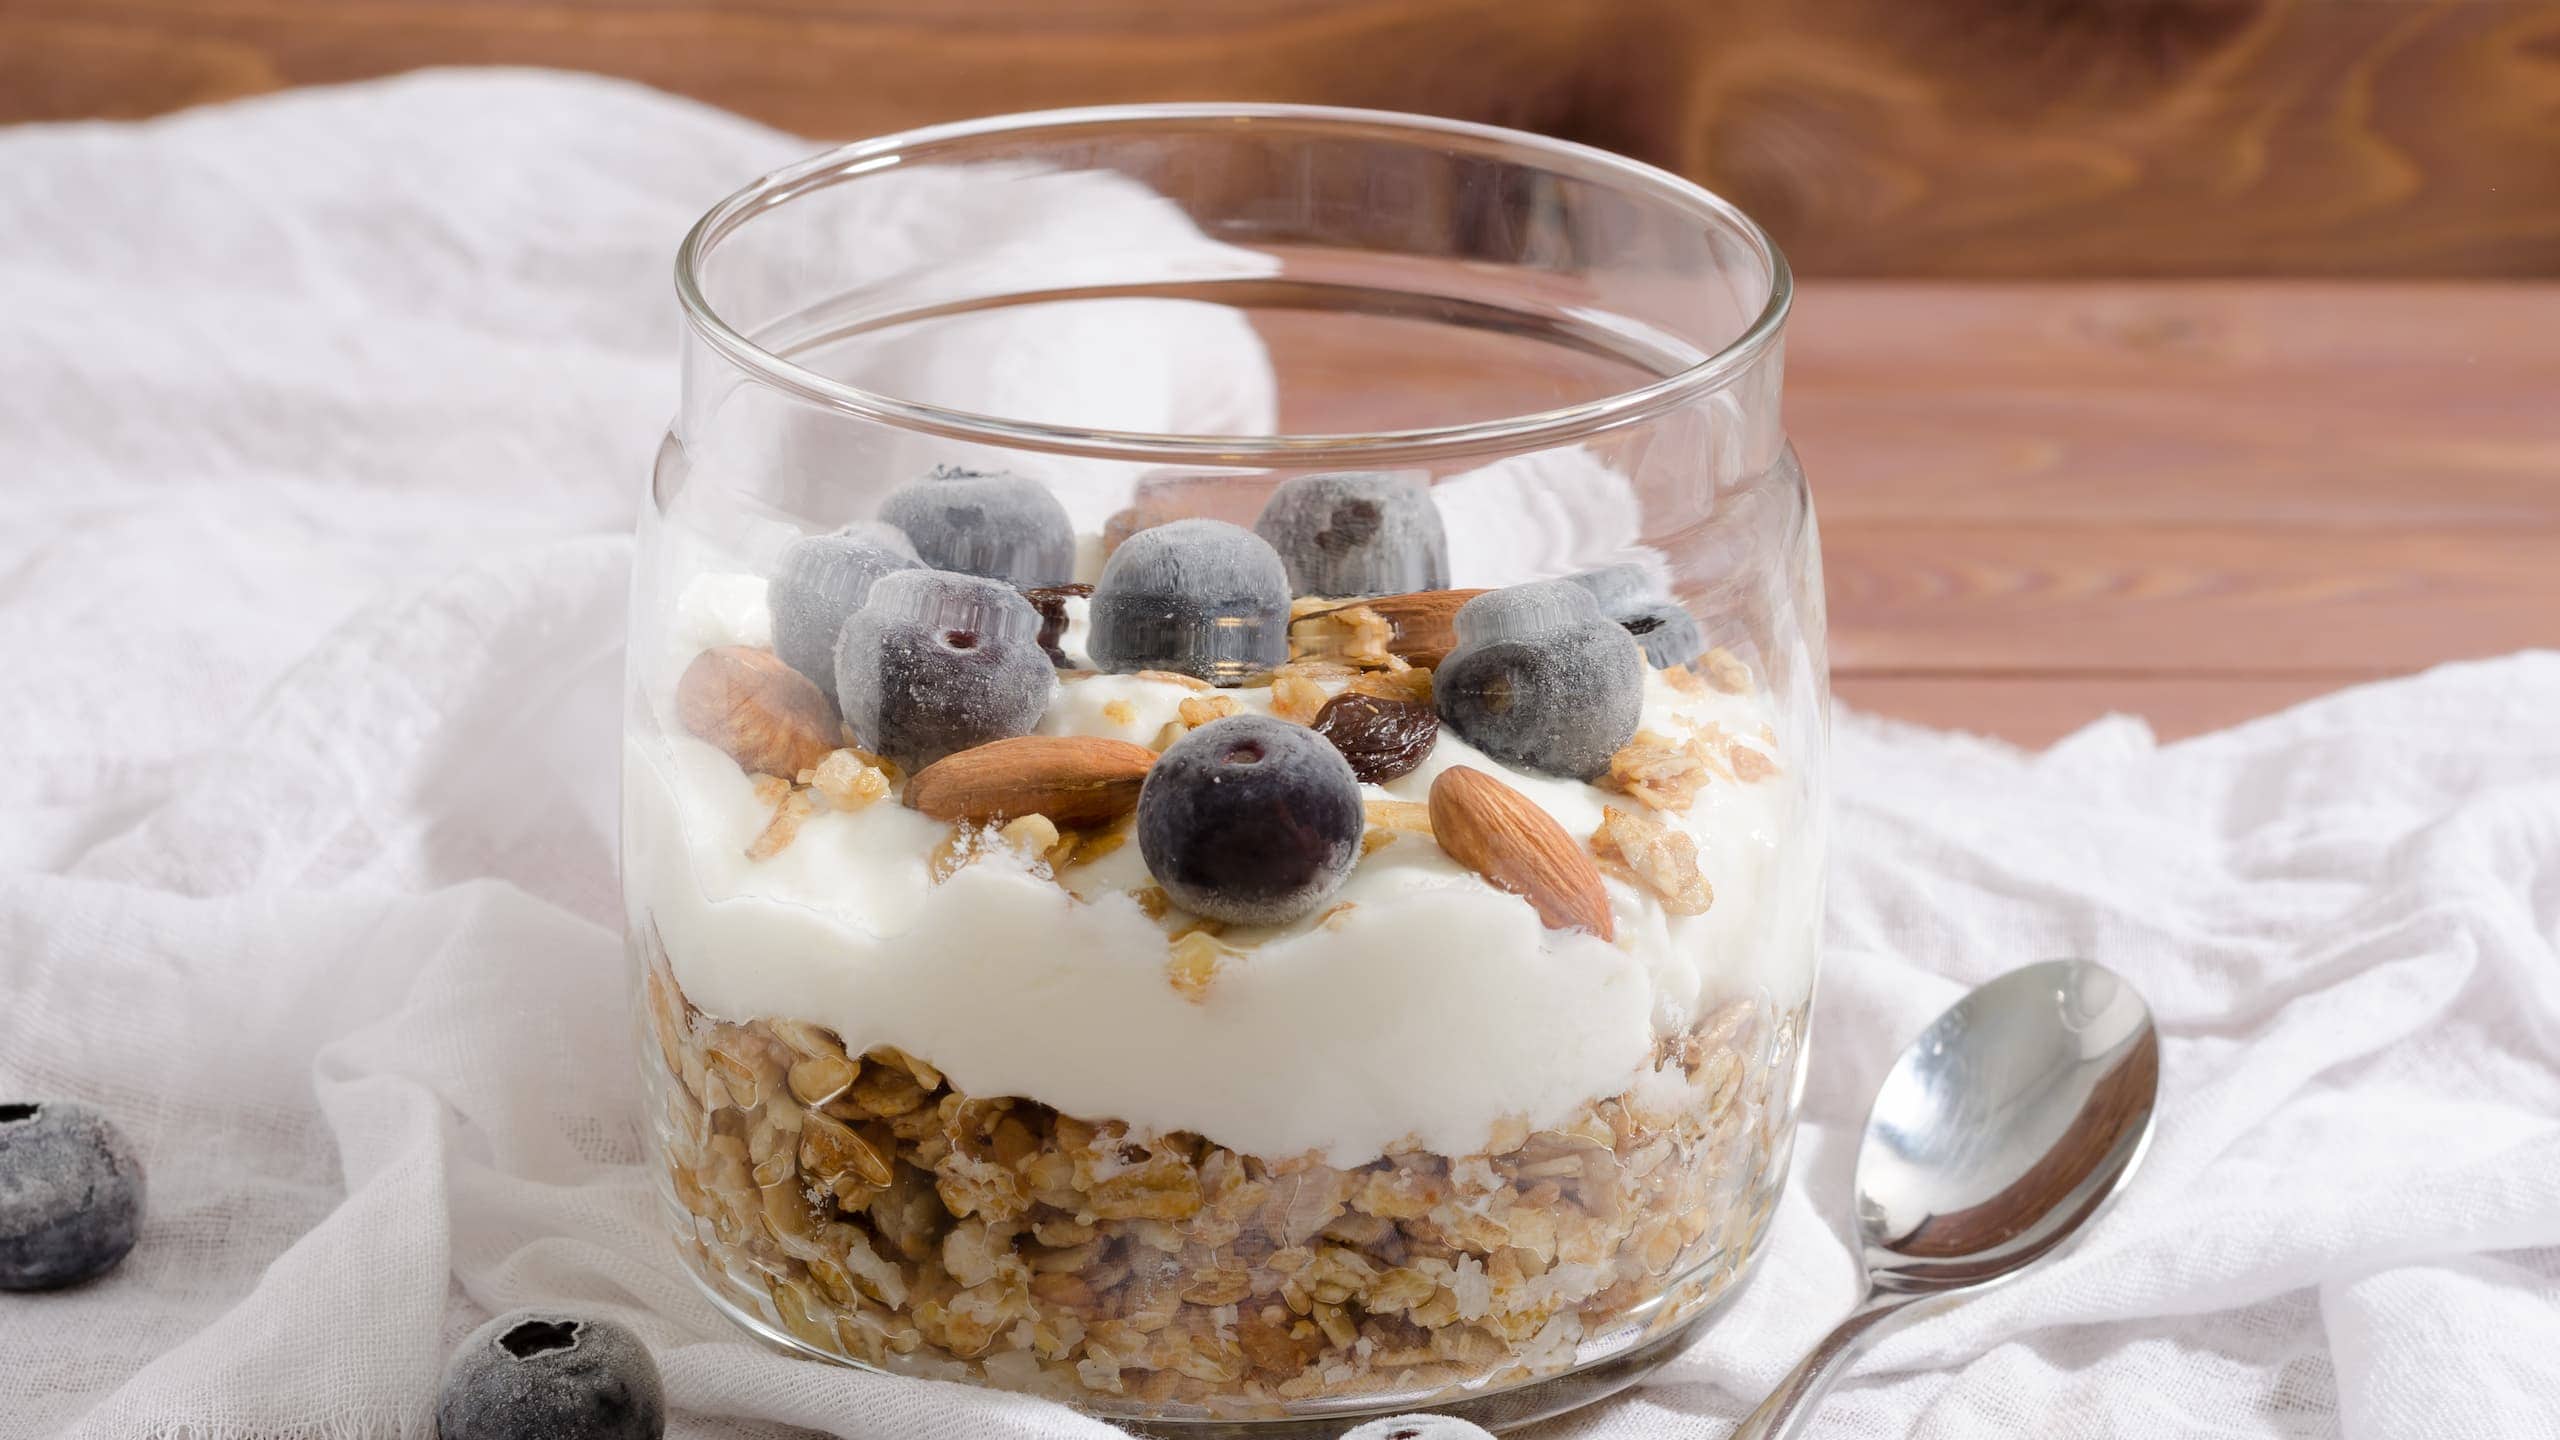 Starbucks overnight oats recipe with natural yogurt, blueberry, and nuts